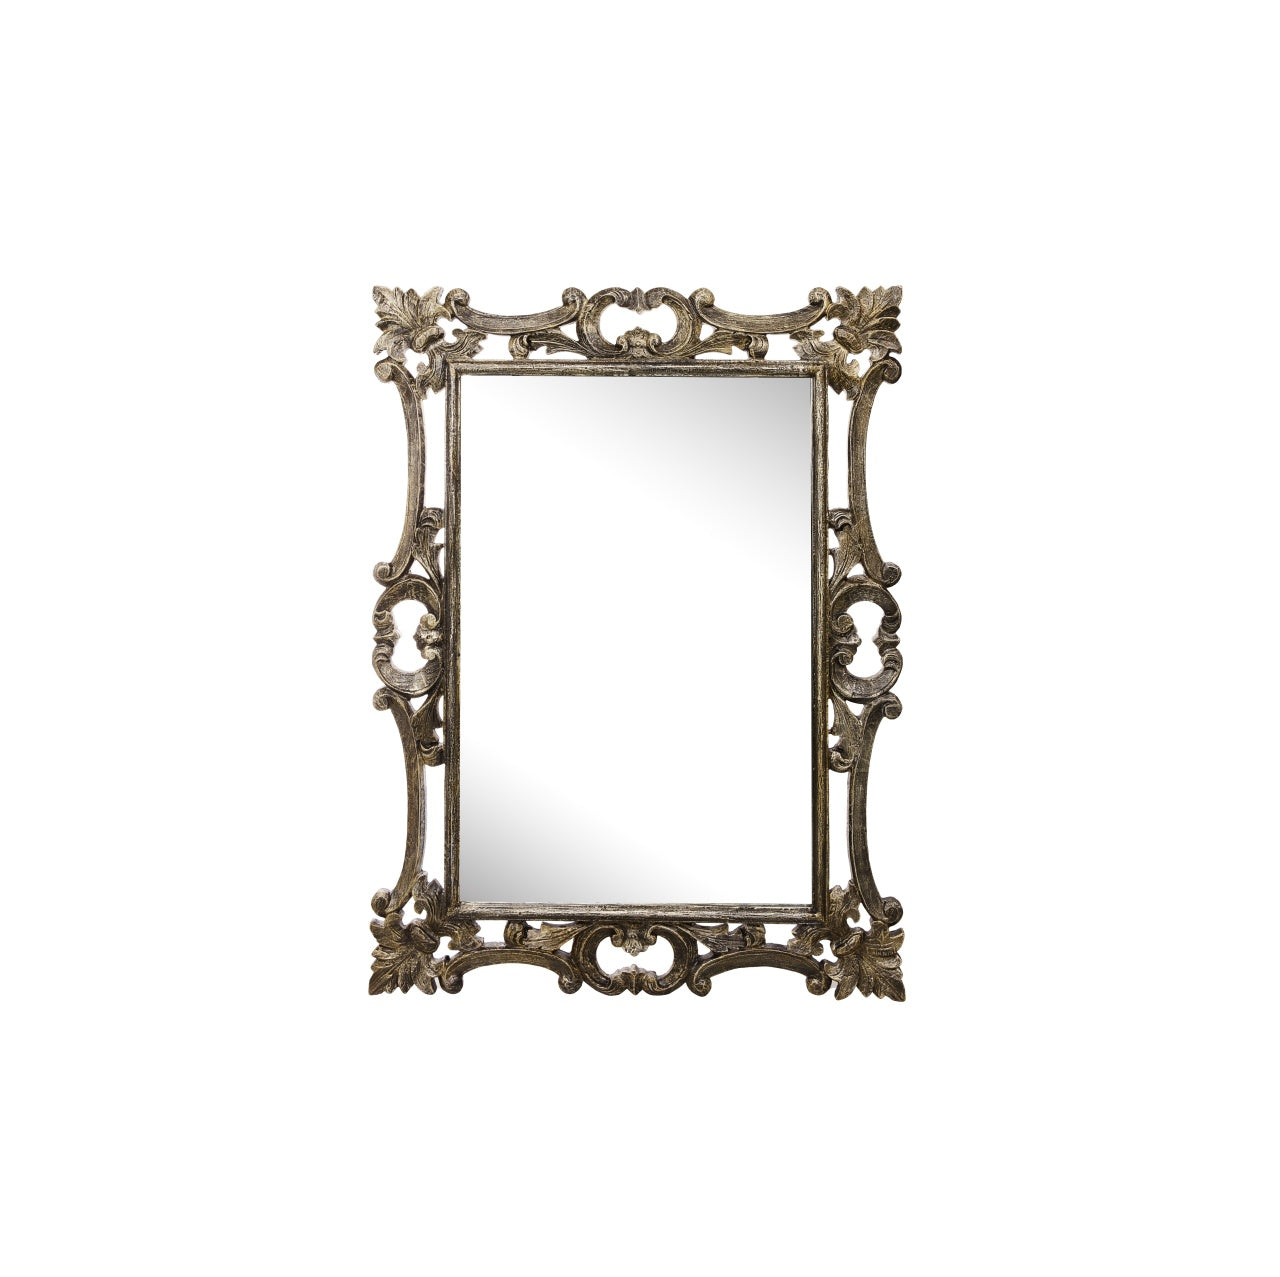 Izzi Small Pewter Silver - Paramount Mirrors and Prints